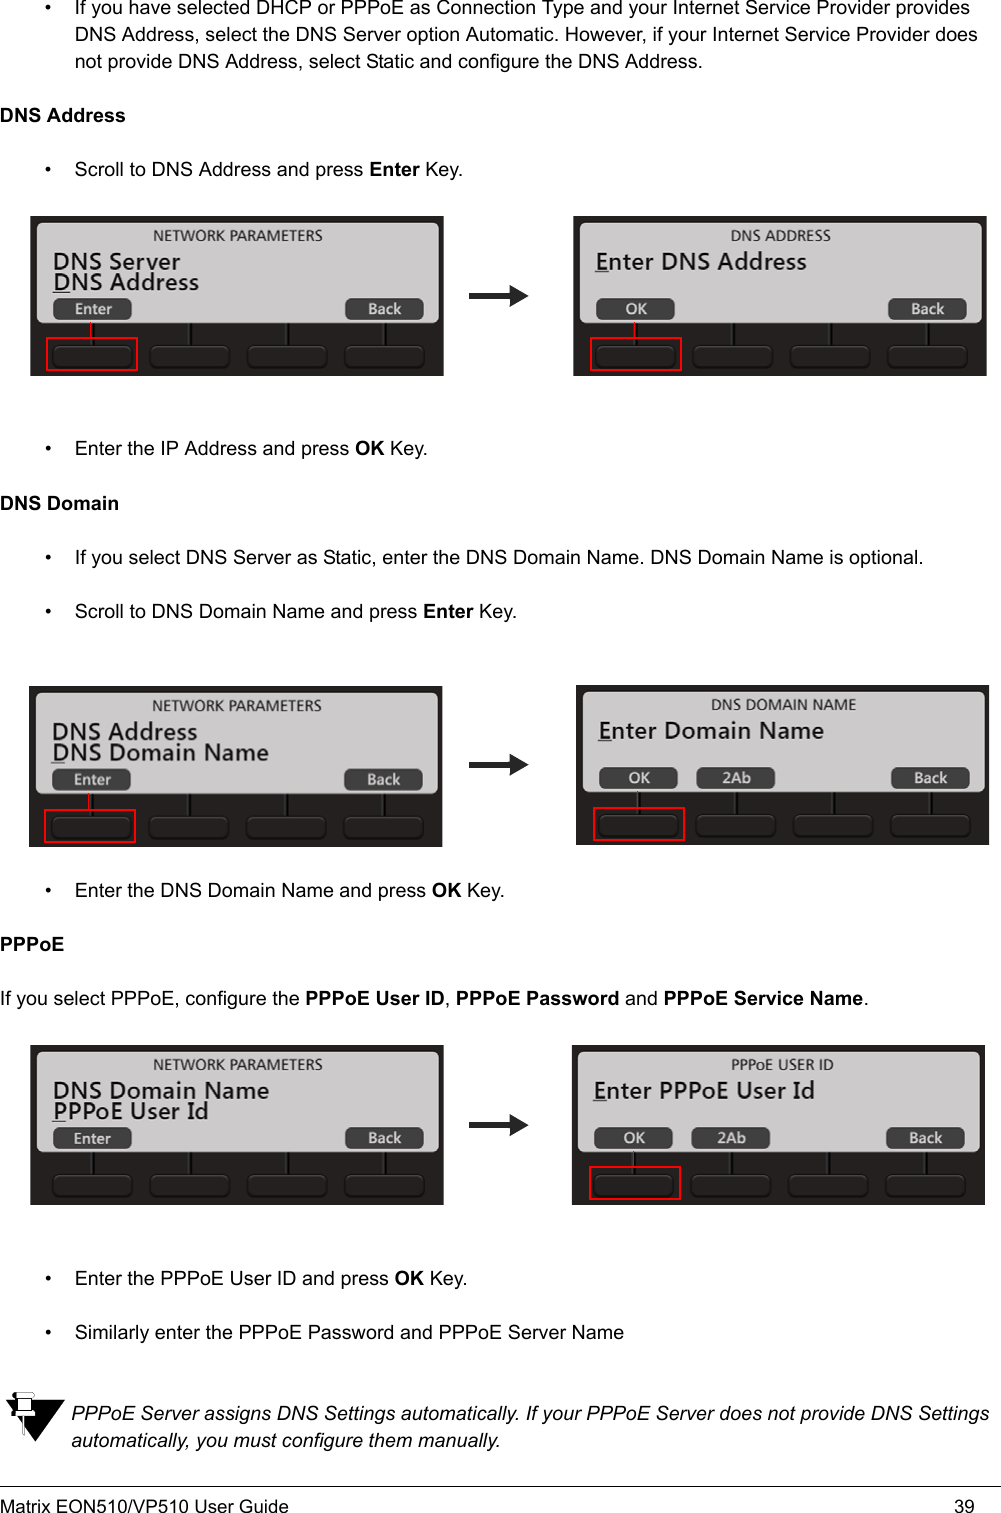 Matrix EON510/VP510 User Guide 39• If you have selected DHCP or PPPoE as Connection Type and your Internet Service Provider provides DNS Address, select the DNS Server option Automatic. However, if your Internet Service Provider does not provide DNS Address, select Static and configure the DNS Address.DNS Address• Scroll to DNS Address and press Enter Key.• Enter the IP Address and press OK Key.DNS Domain• If you select DNS Server as Static, enter the DNS Domain Name. DNS Domain Name is optional.• Scroll to DNS Domain Name and press Enter Key.• Enter the DNS Domain Name and press OK Key.PPPoE If you select PPPoE, configure the PPPoE User ID, PPPoE Password and PPPoE Service Name. • Enter the PPPoE User ID and press OK Key.• Similarly enter the PPPoE Password and PPPoE Server NamePPPoE Server assigns DNS Settings automatically. If your PPPoE Server does not provide DNS Settings automatically, you must configure them manually. 